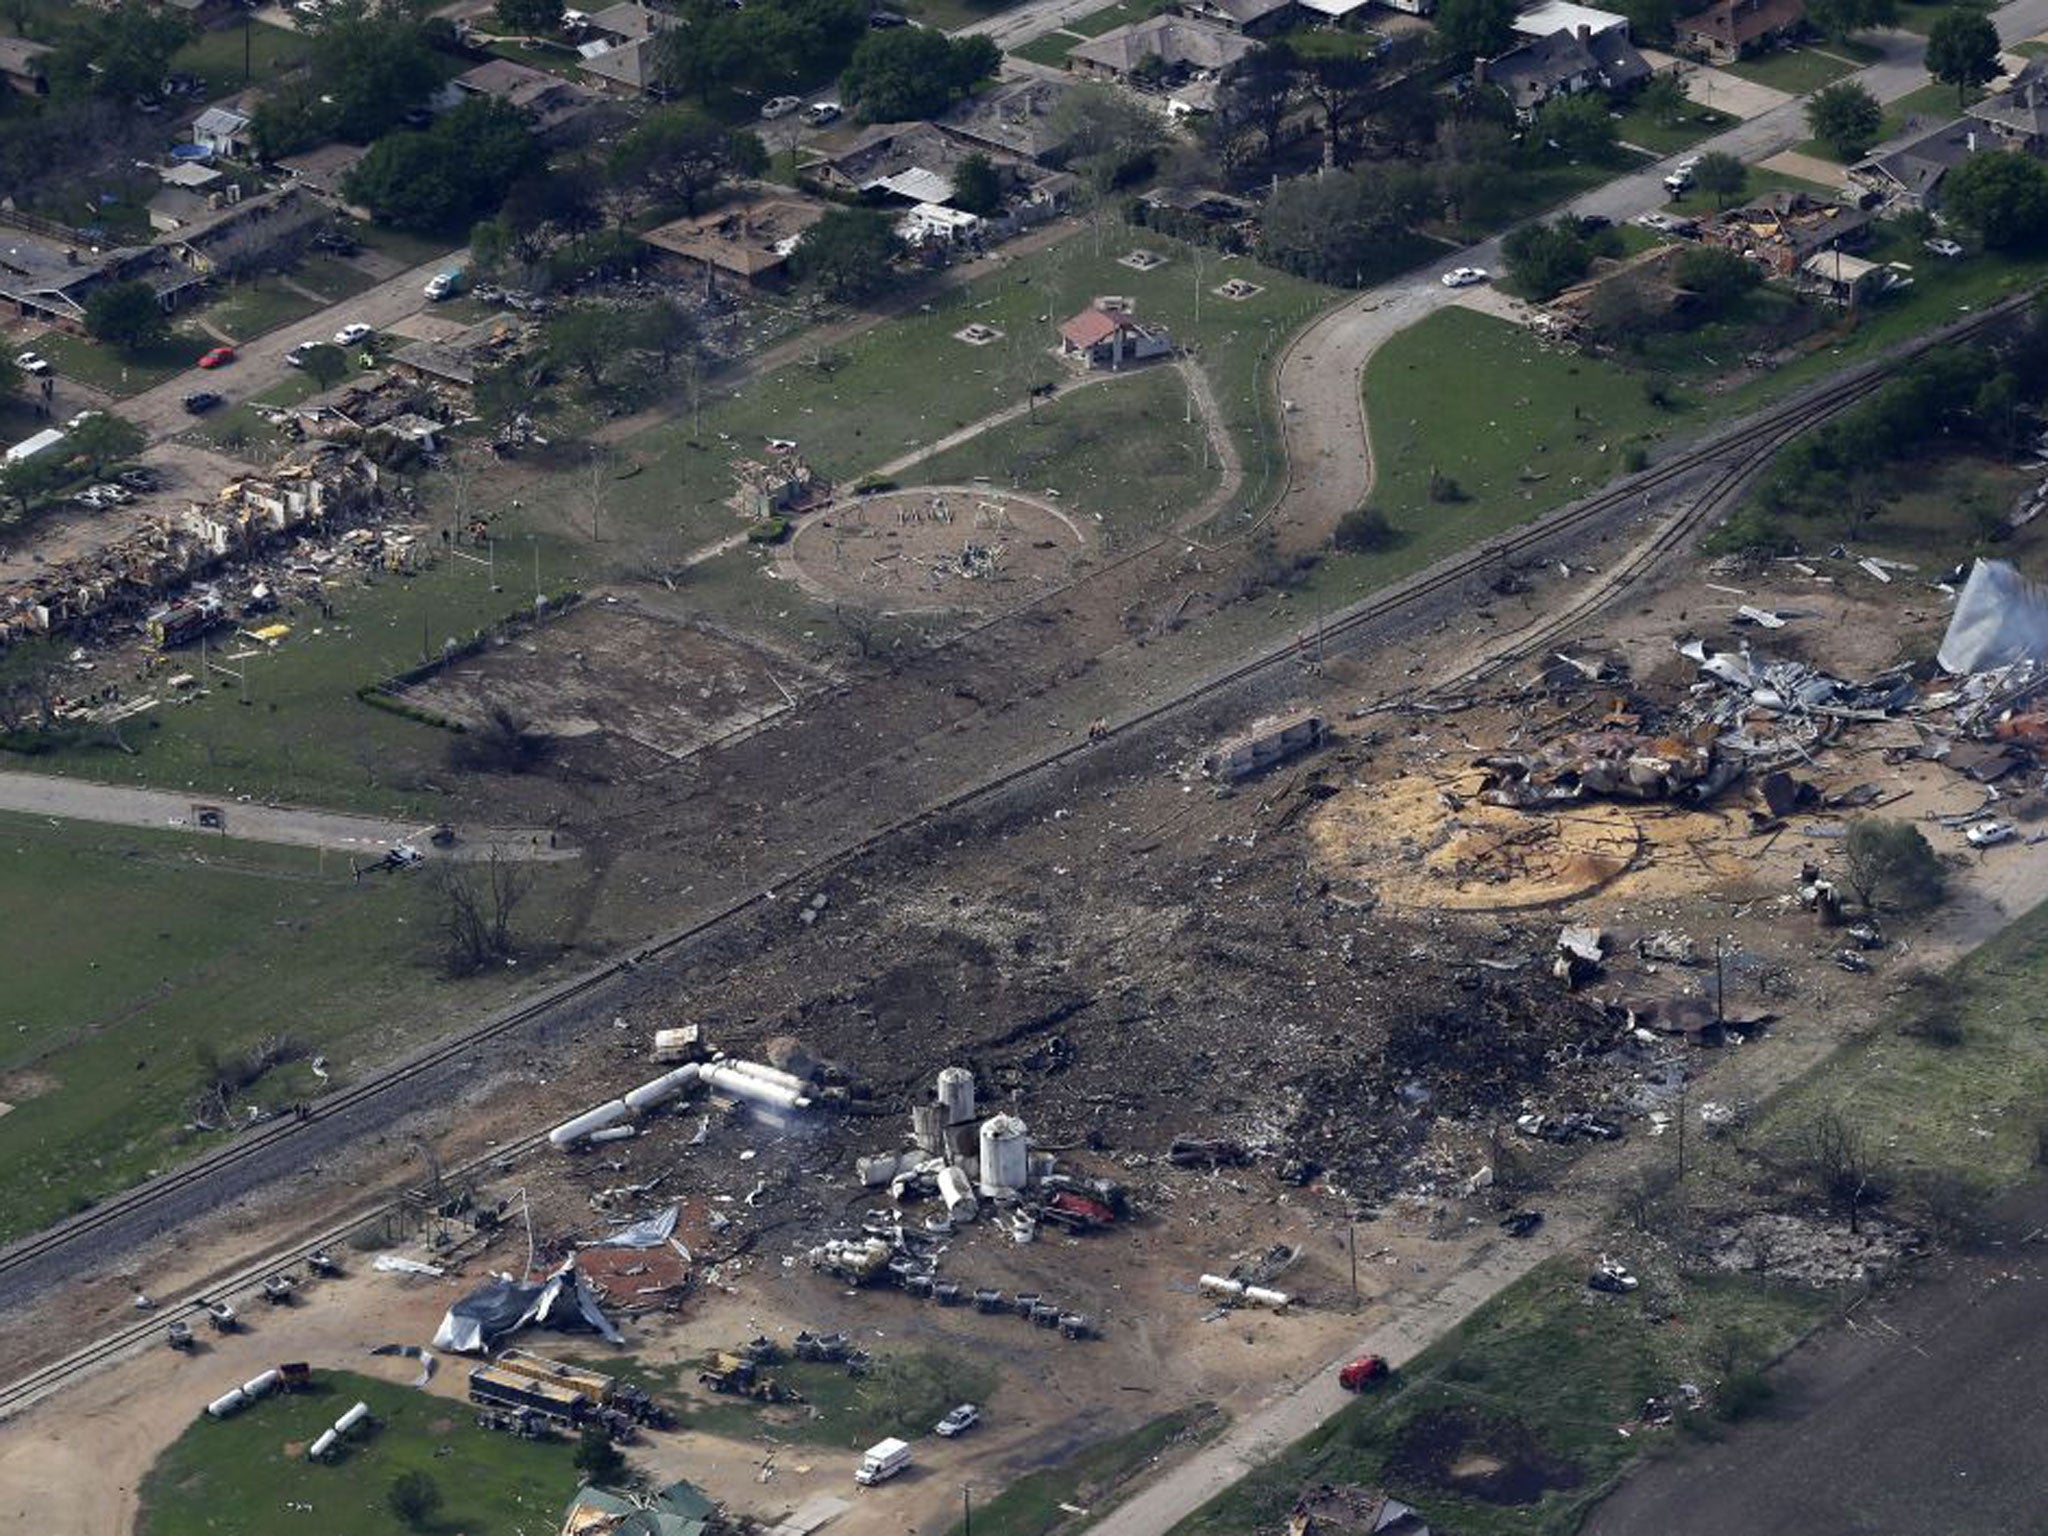 Aerial photos taken yesterday reveal the scale of the explosion at the fertiliser plant in West, Texas